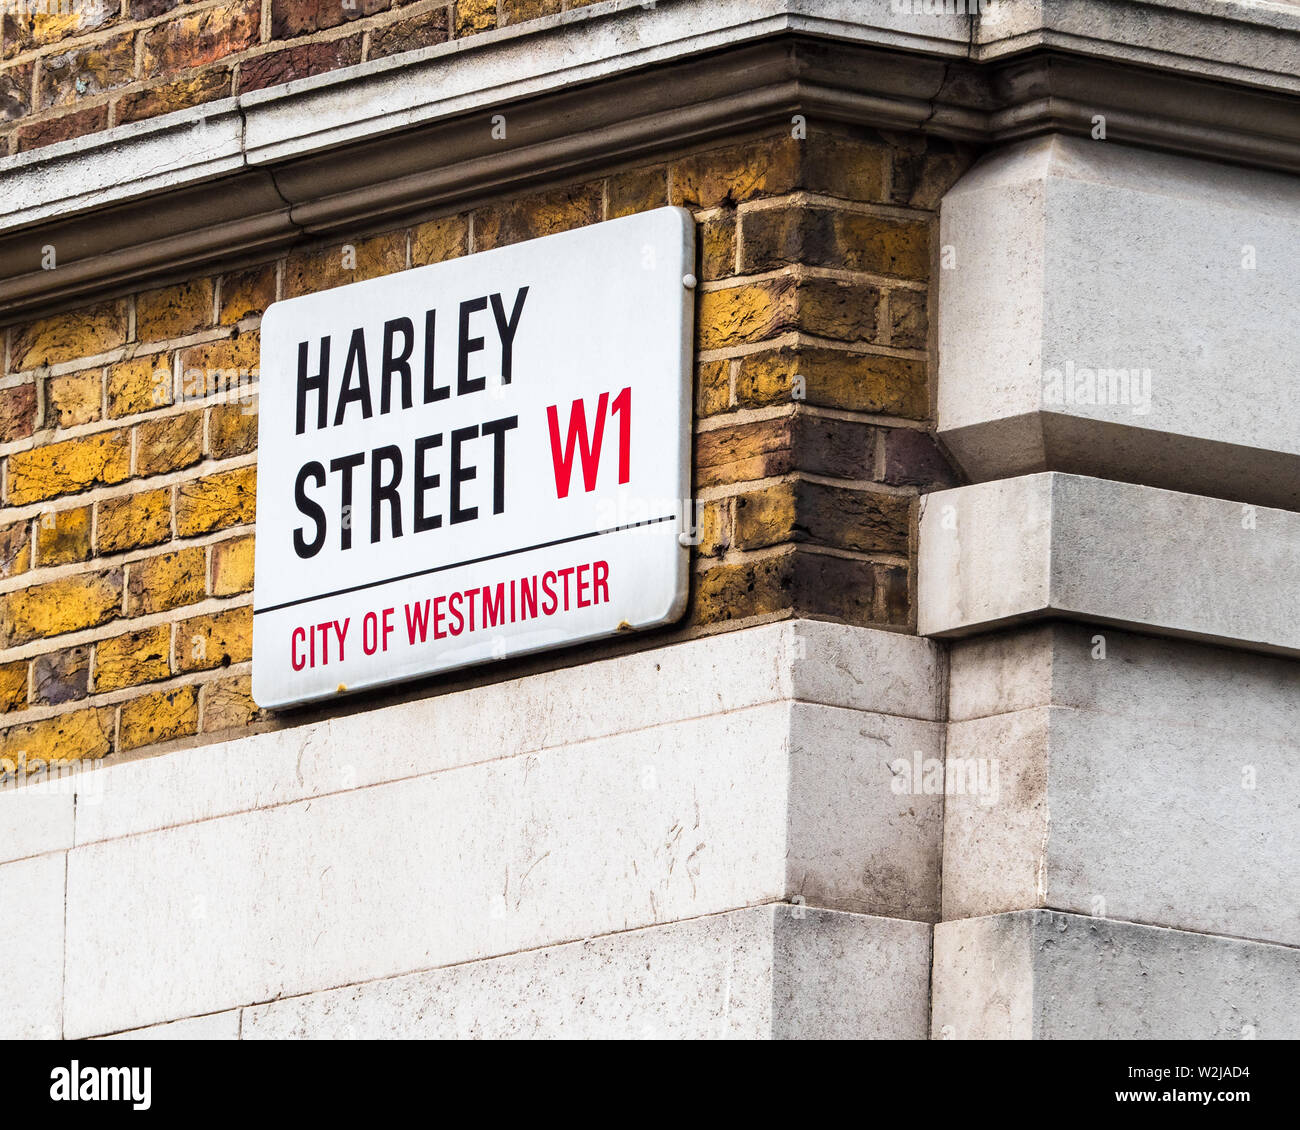 Albums 100+ Images harley street in london is well known for its large number of what? Full HD, 2k, 4k